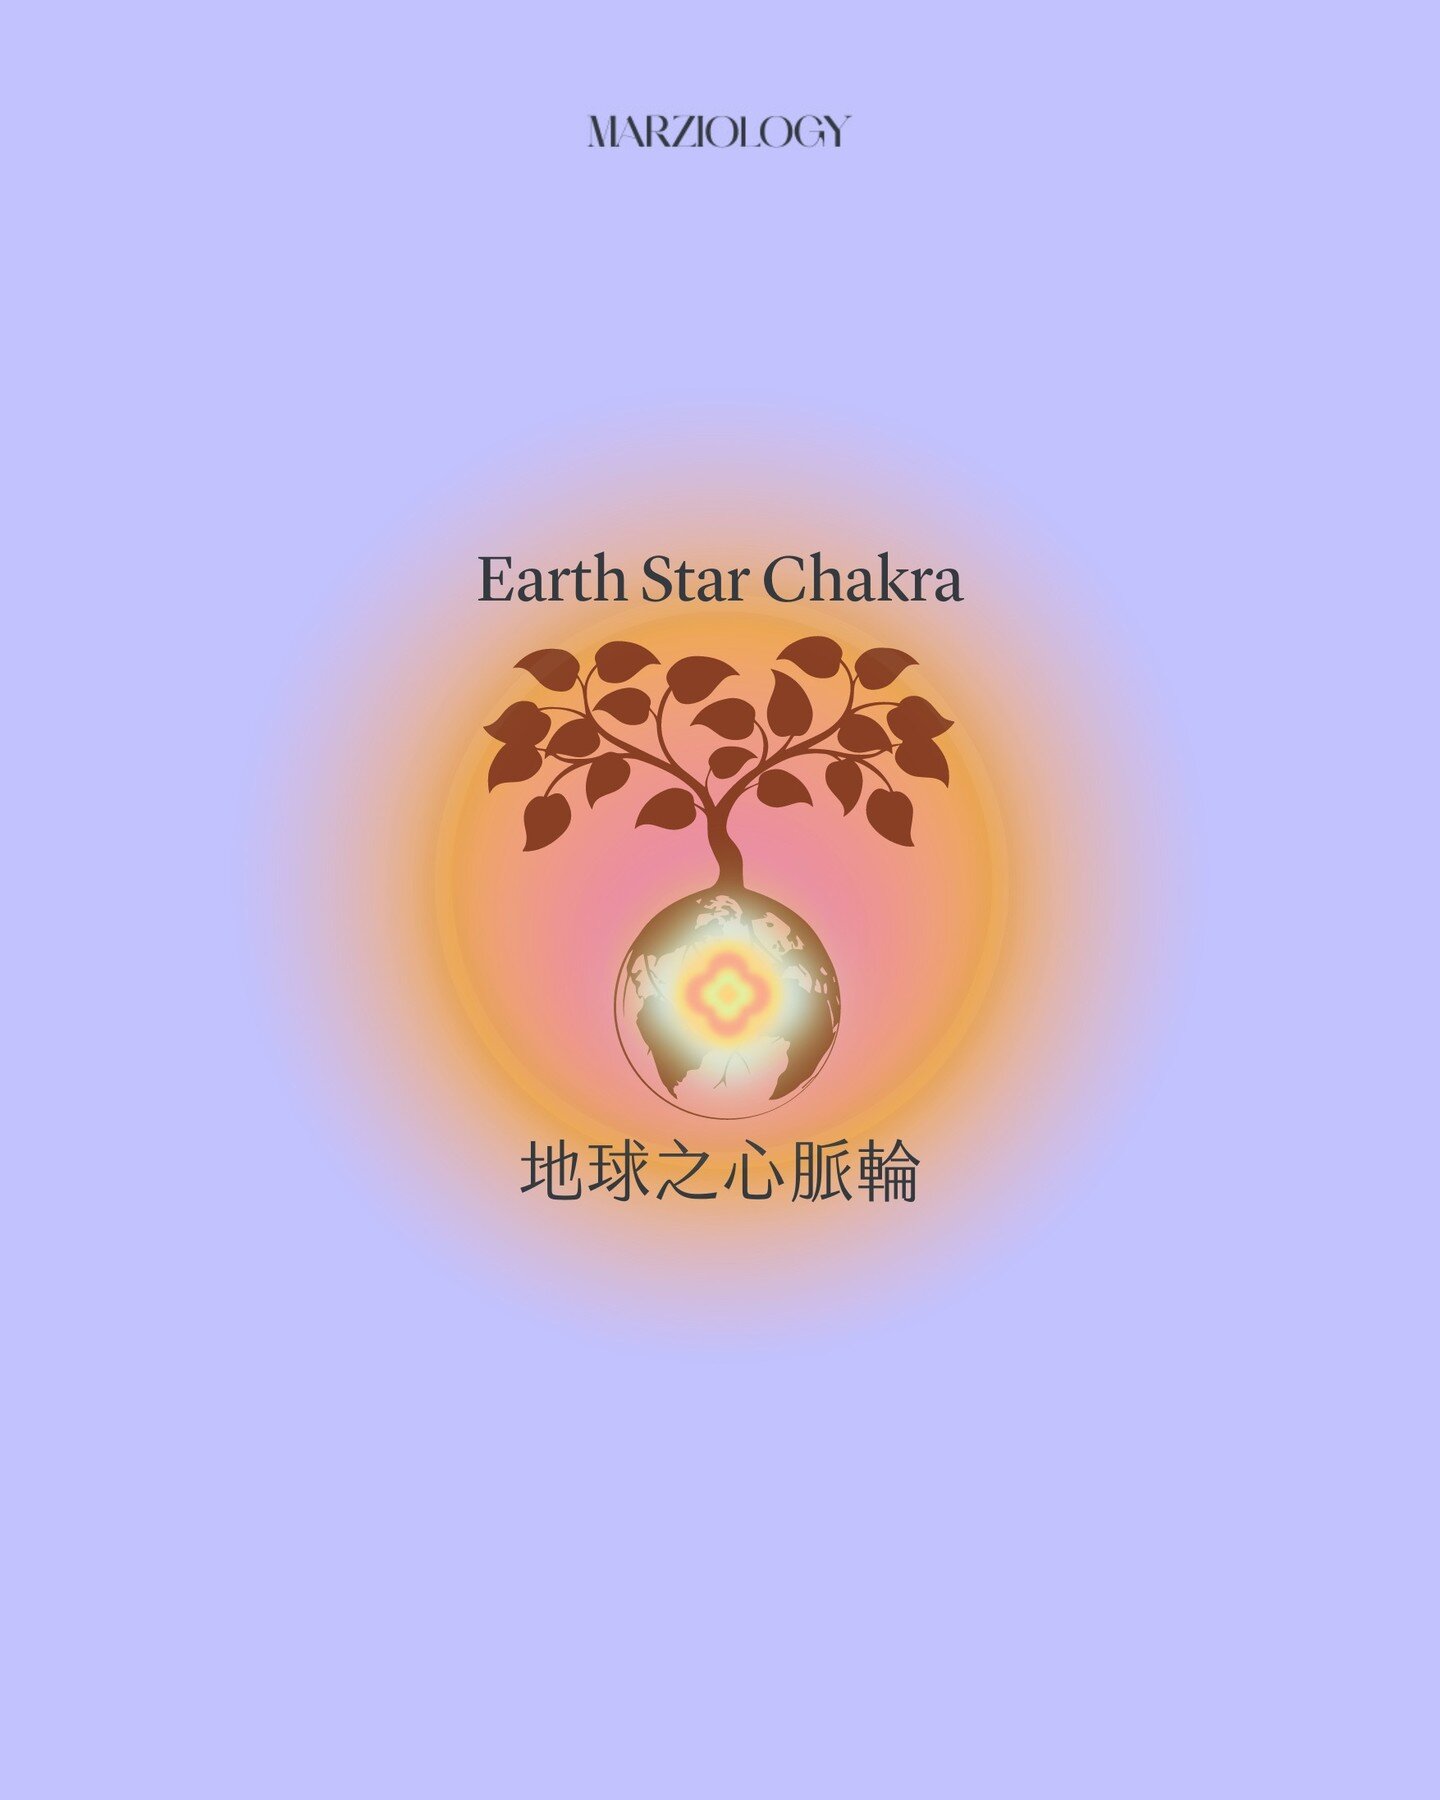 I feel connected with the Earth and all of human kind, past and present. I am present and grounded on all levels and dimensions 🦶🌍🤎 從過去到現在，我體驗與地球和人類集體共享的連結。我從各個層面和維度，植根在當下。

The Sanskrit name of the Earth Star Chakra, Vasundhara, translates to &ld